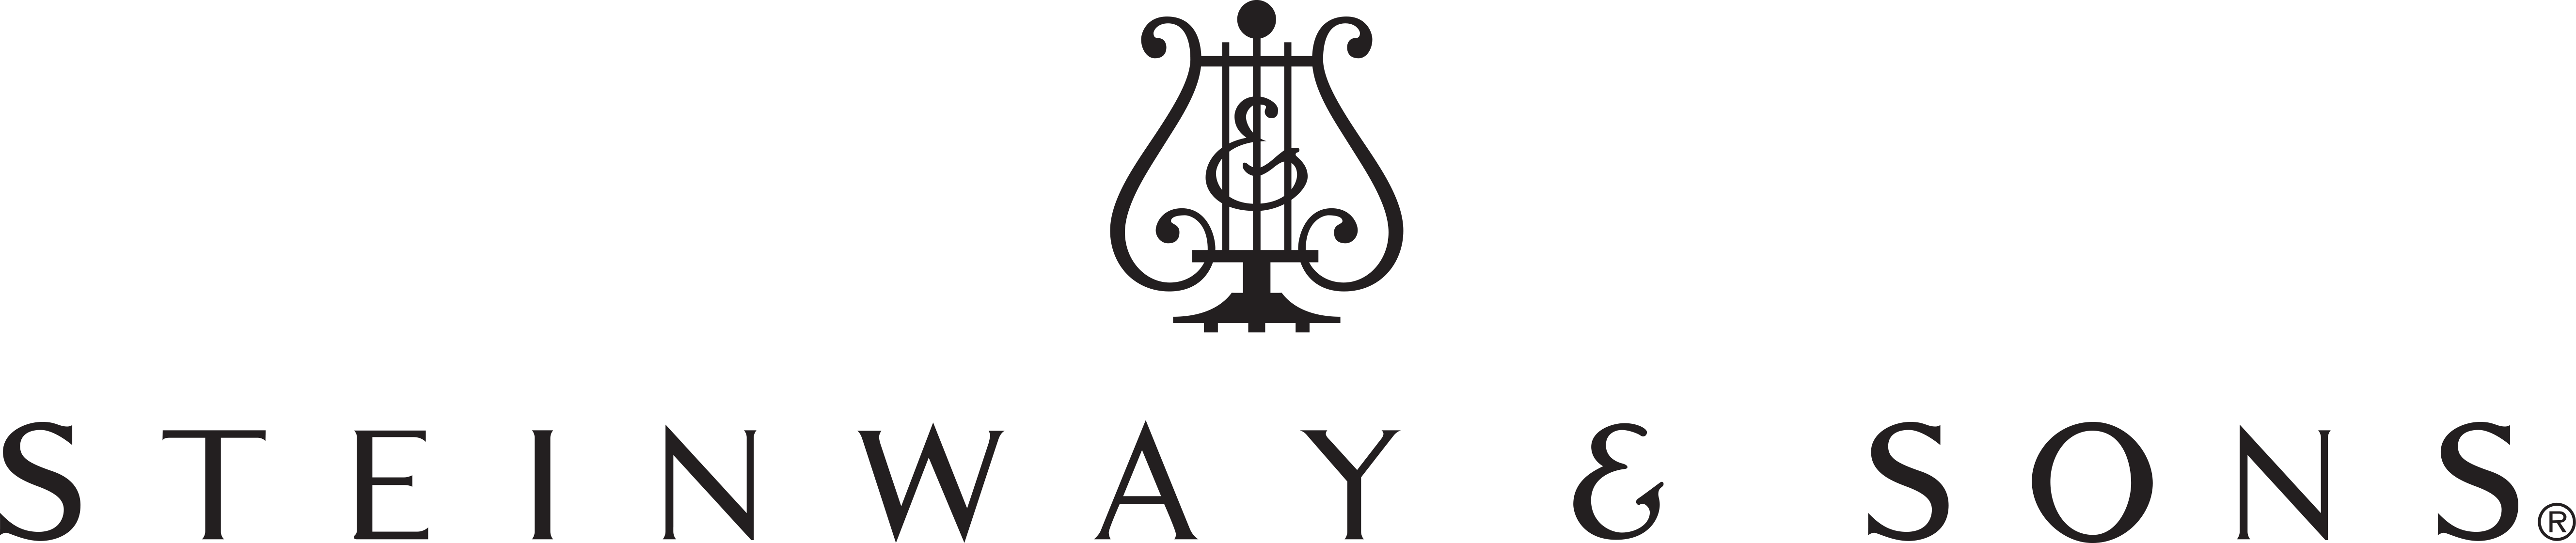 Logo of Steinway and Sons Pianos